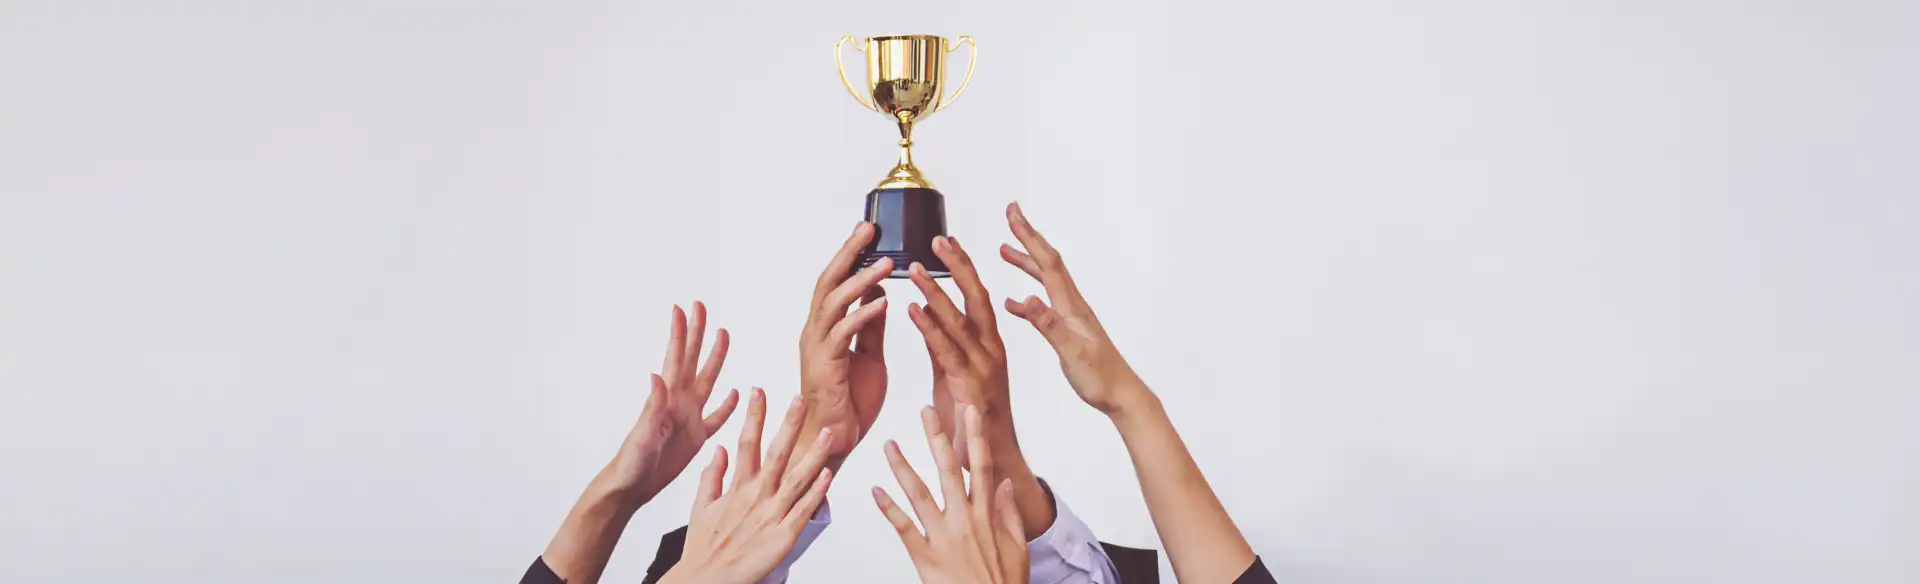 Synechron Wins ‘Team of the Year’ Award in the US FinTech Awards 2021